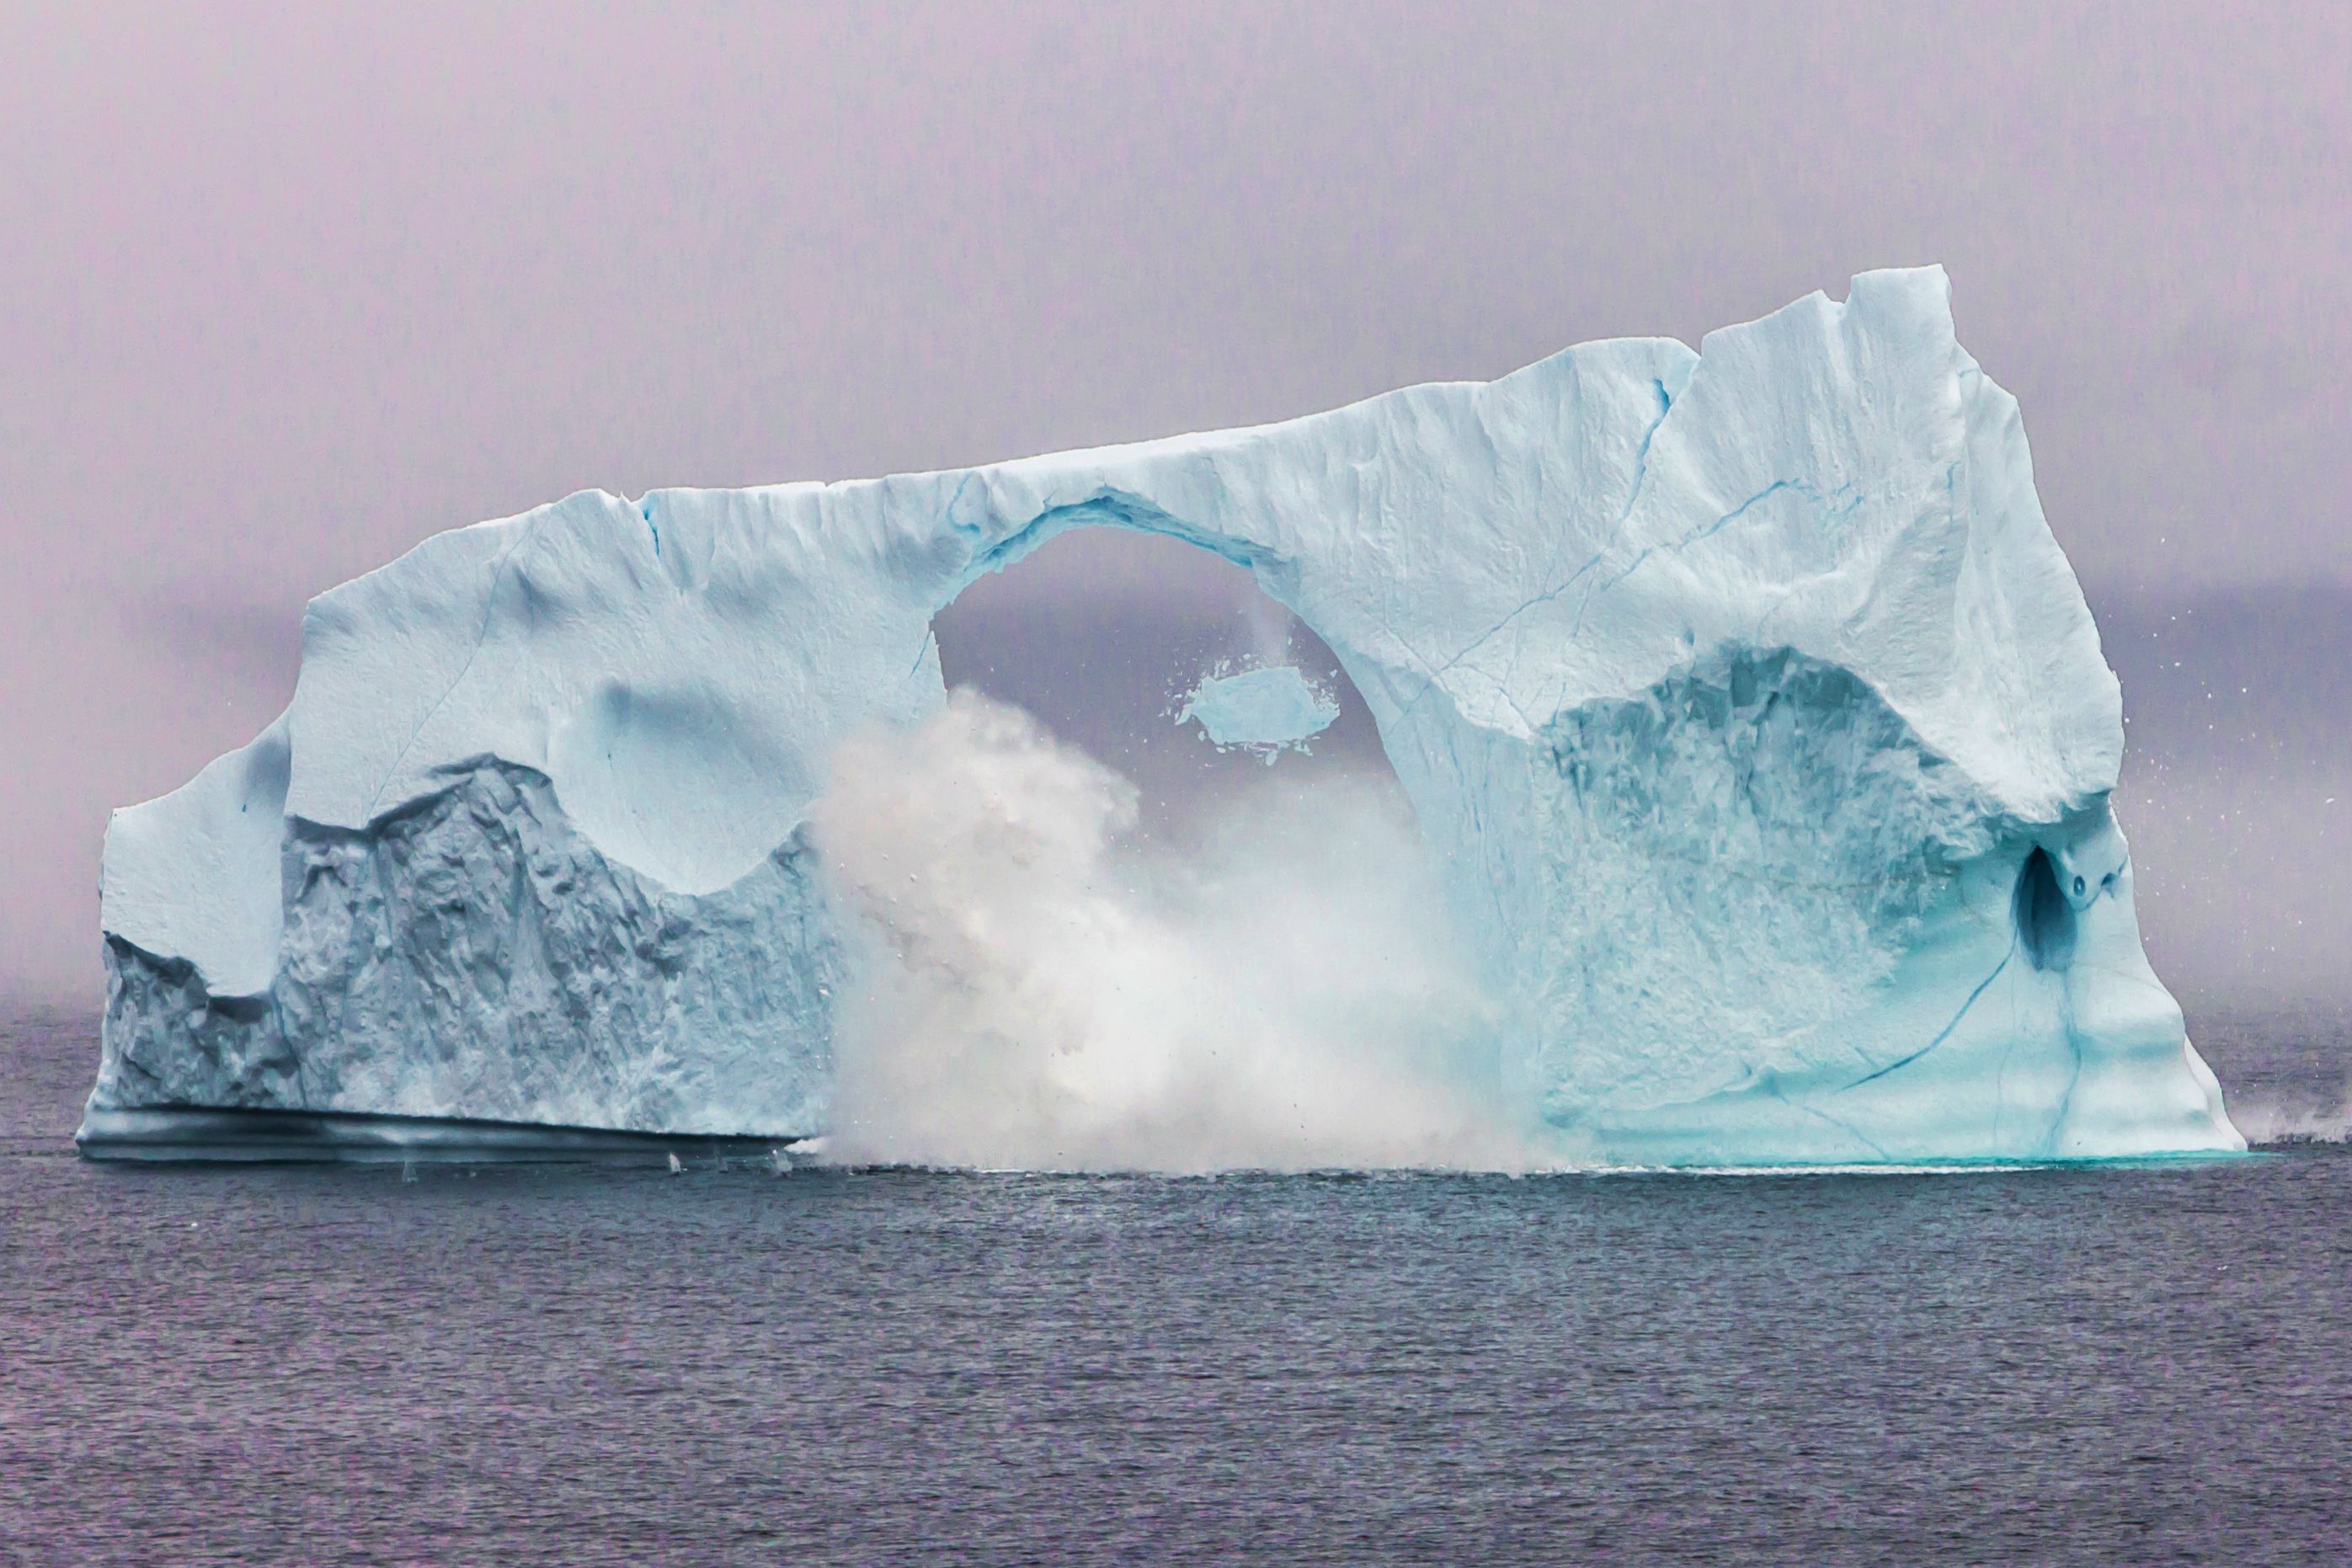 Interesting Photo of the Day: Collapsing Iceberg in Cape Spear